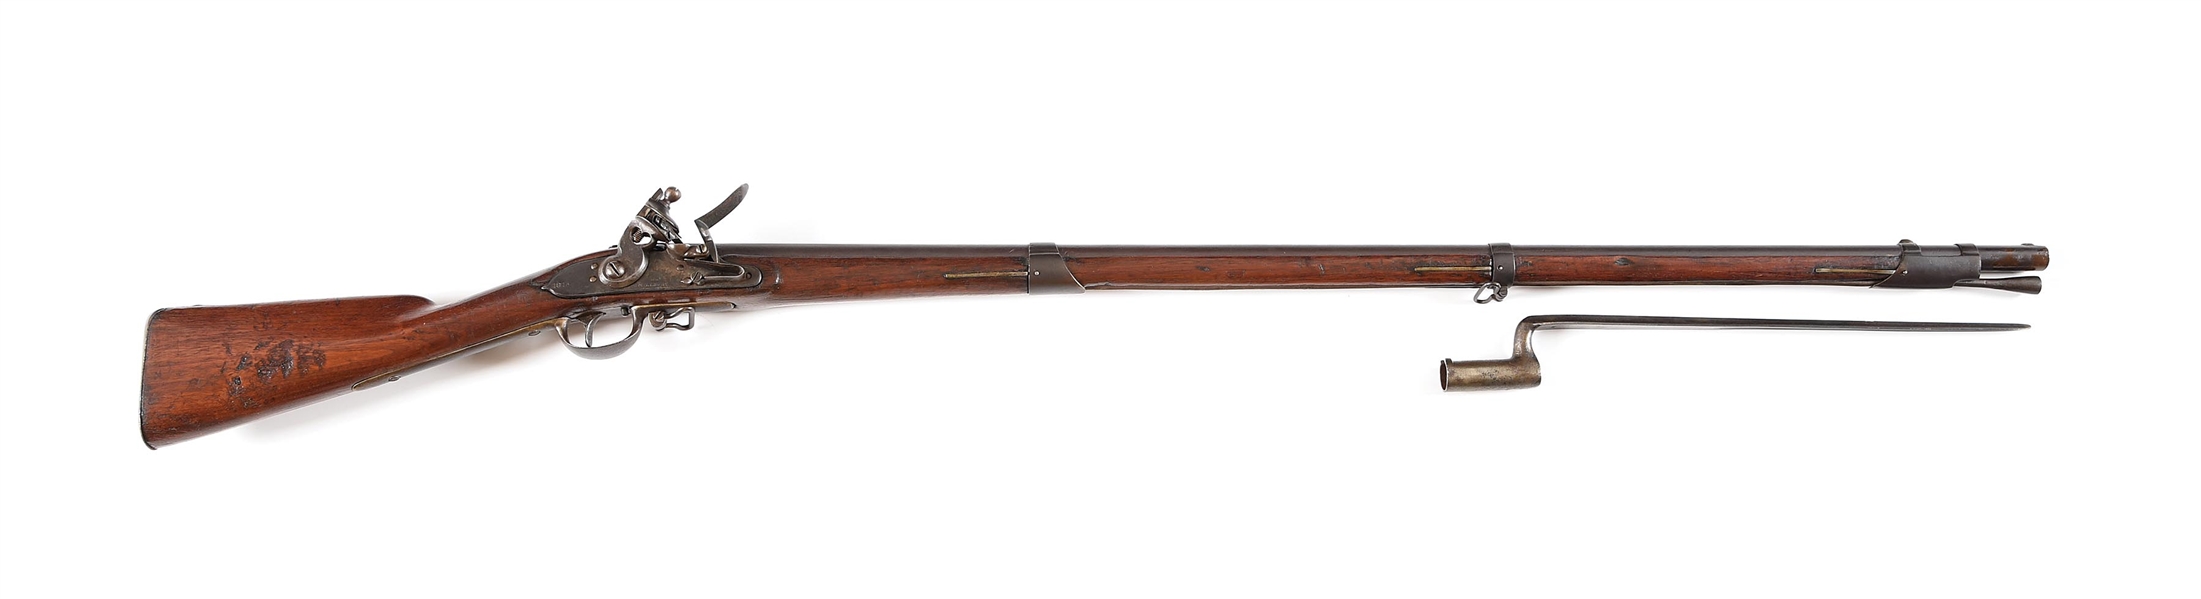 (A) MARYLAND BRANDED WATERS MODEL 1808 FLINTLOCK MUSKET DATED 1815 WITH BAYONET.